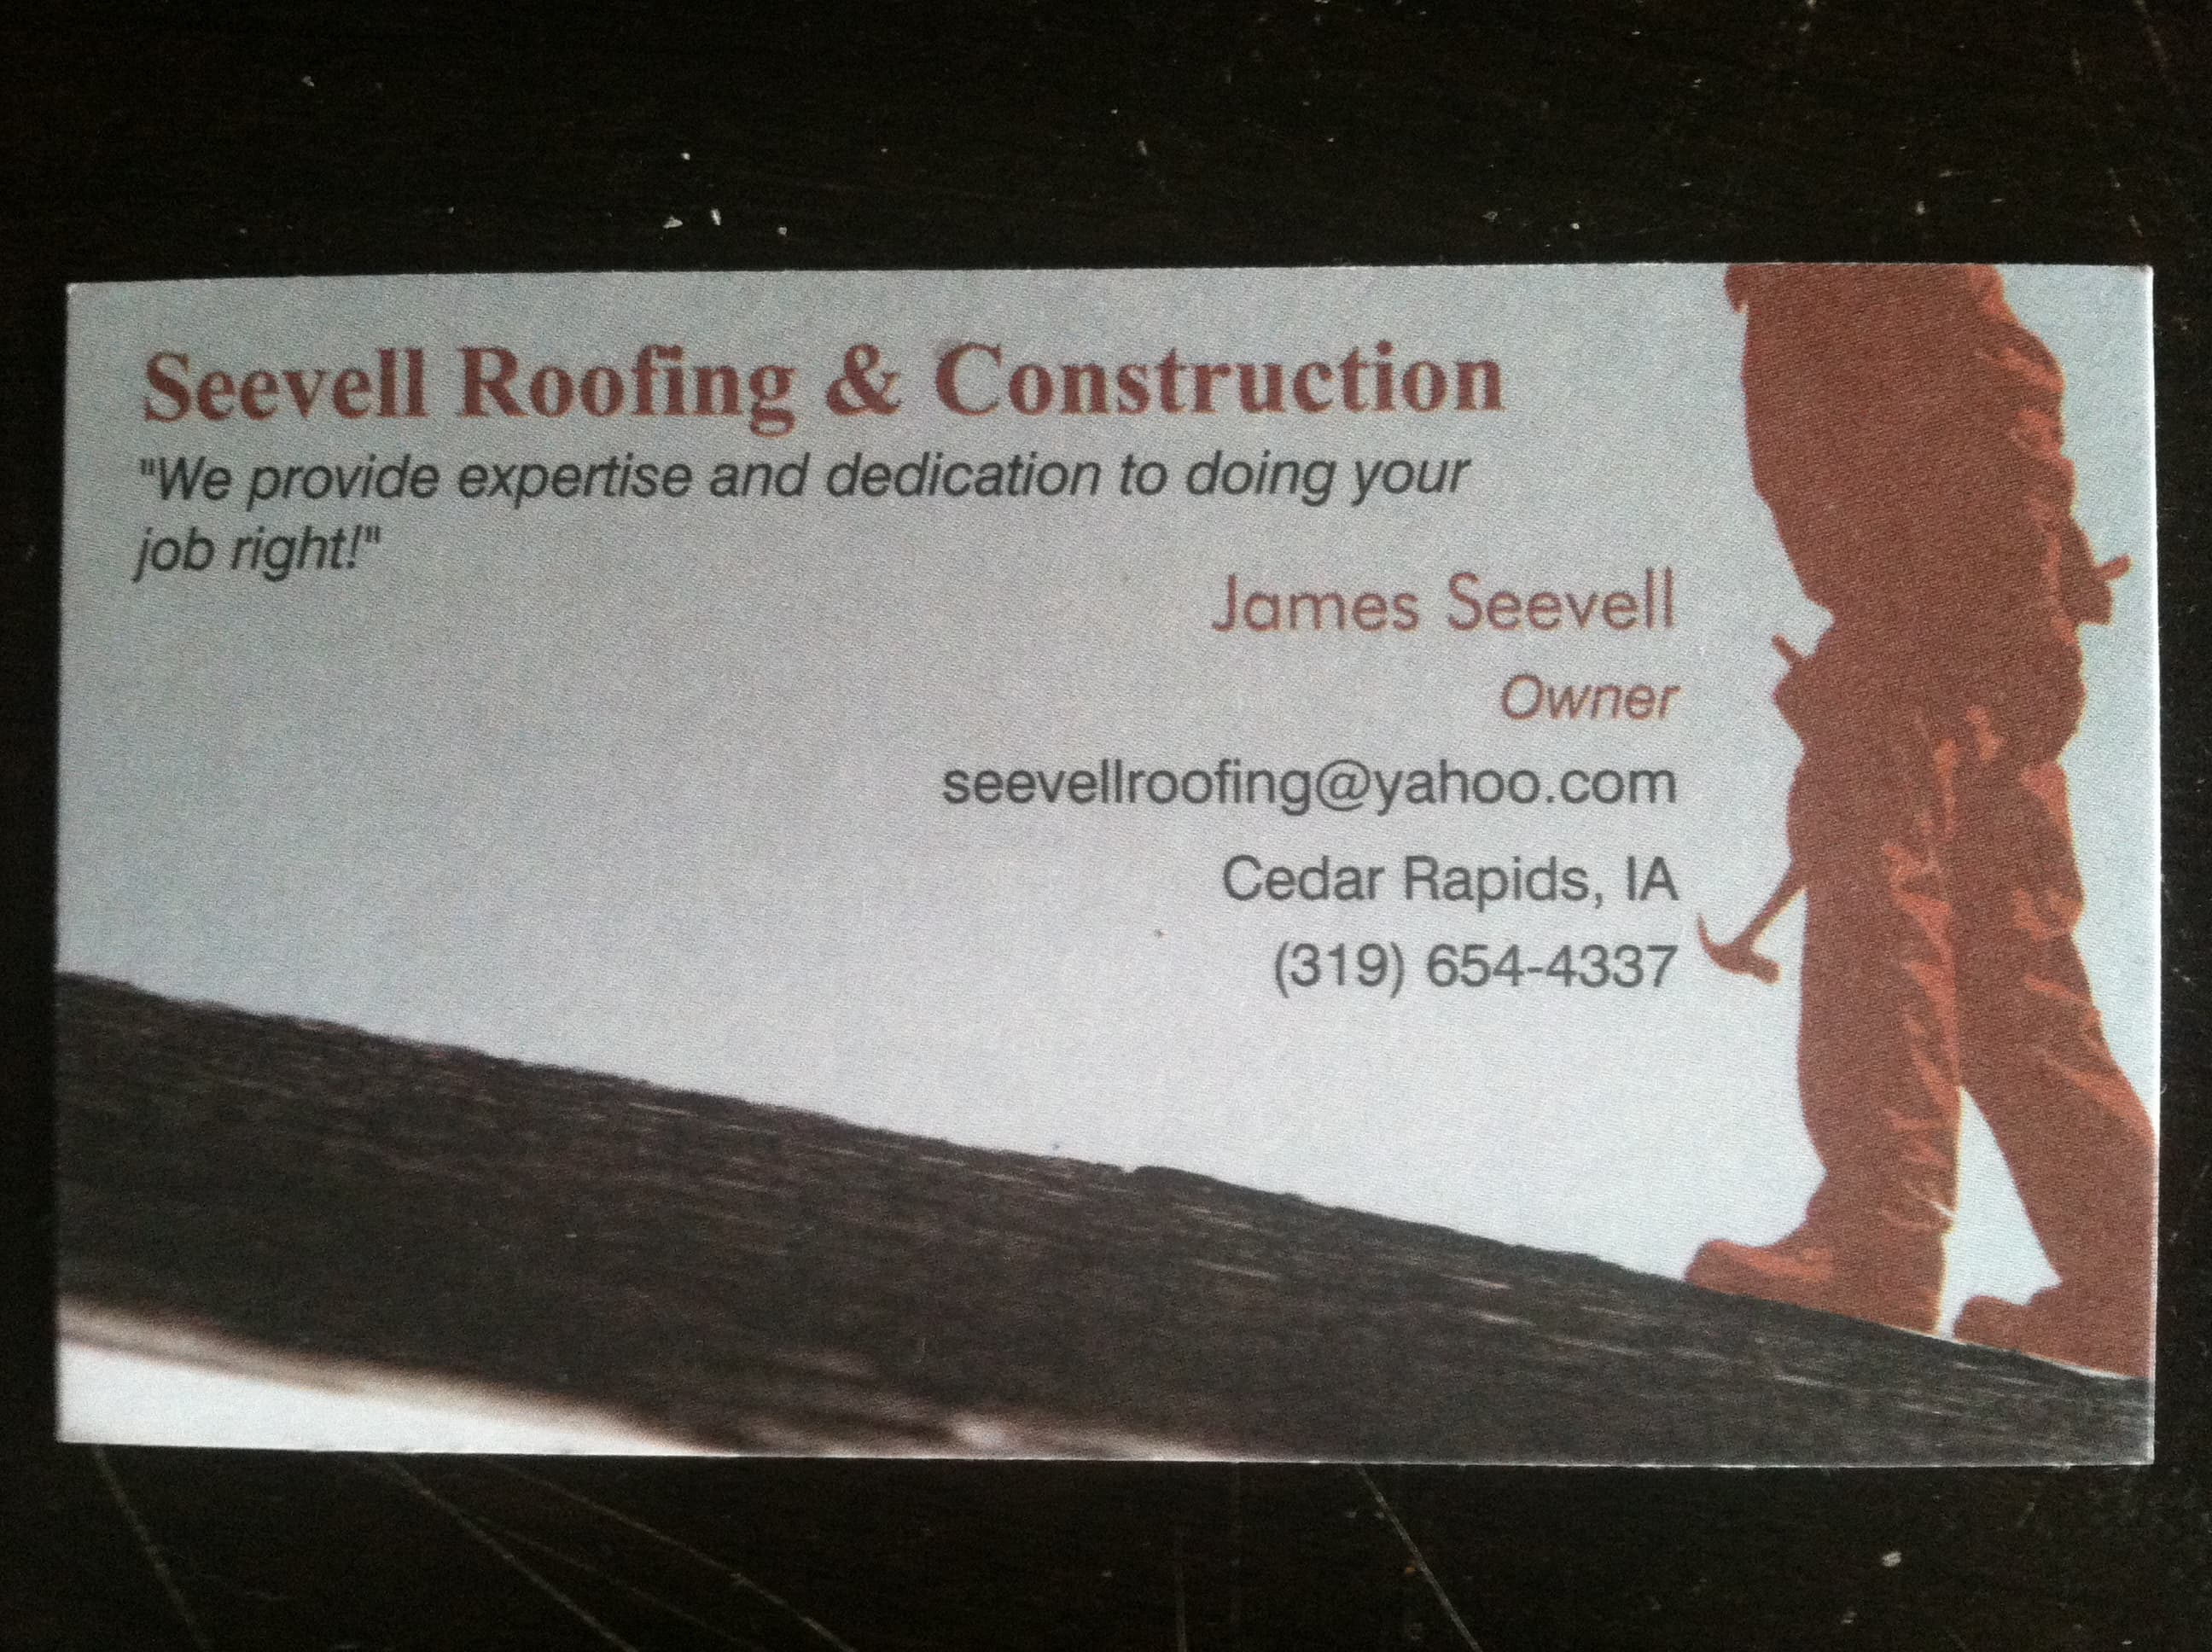 Seevell Roofing & Construction